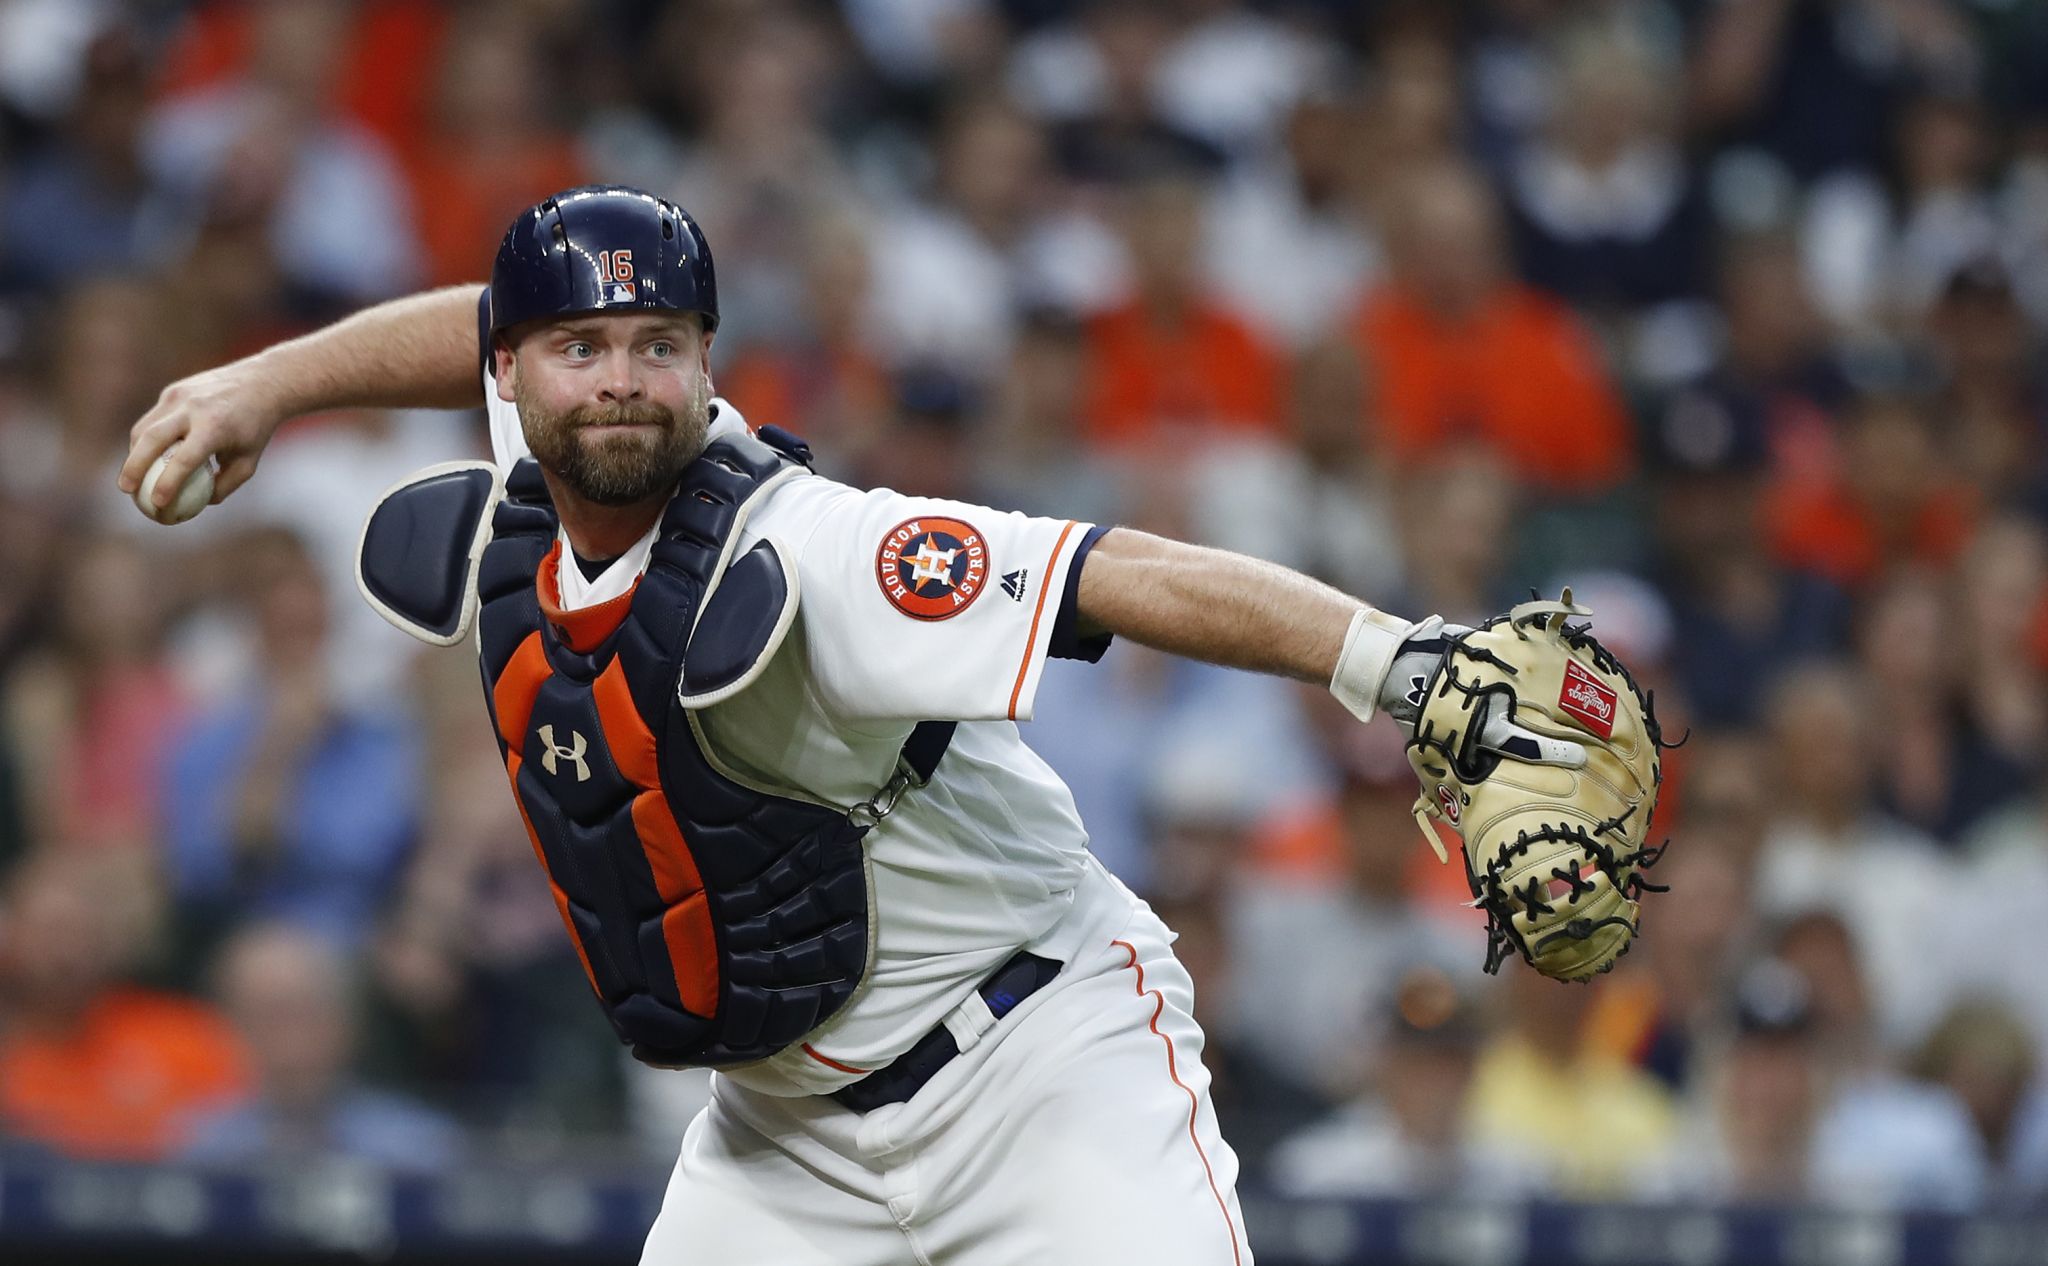 Brian McCann's uncanny ability to get best out of pitchers serves